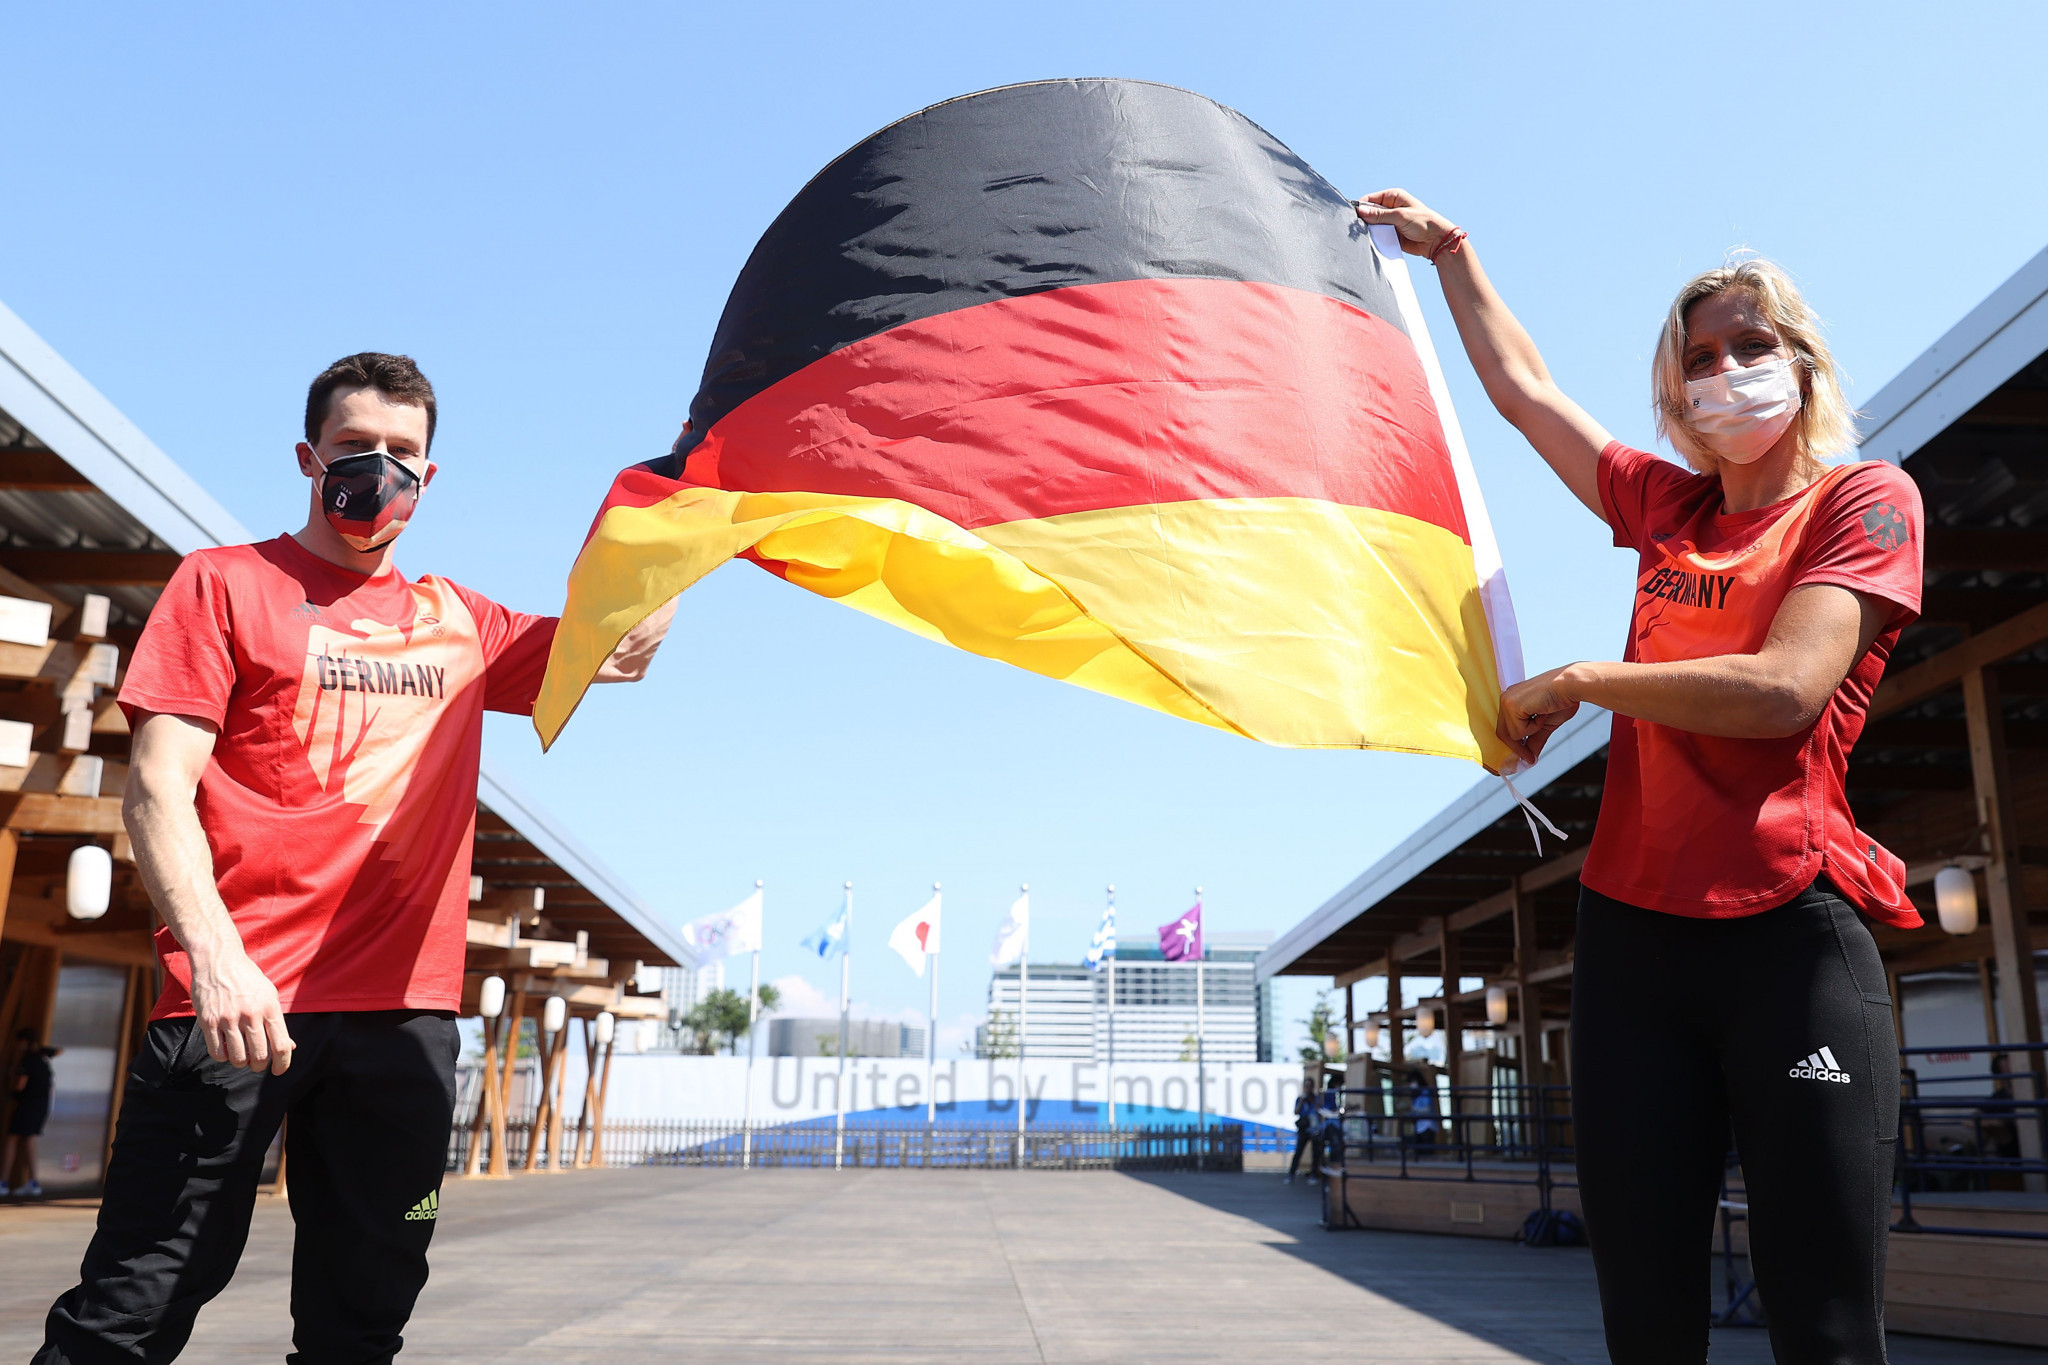 Ludwig and Hausding named as Germany's flagbearers for Tokyo 2020